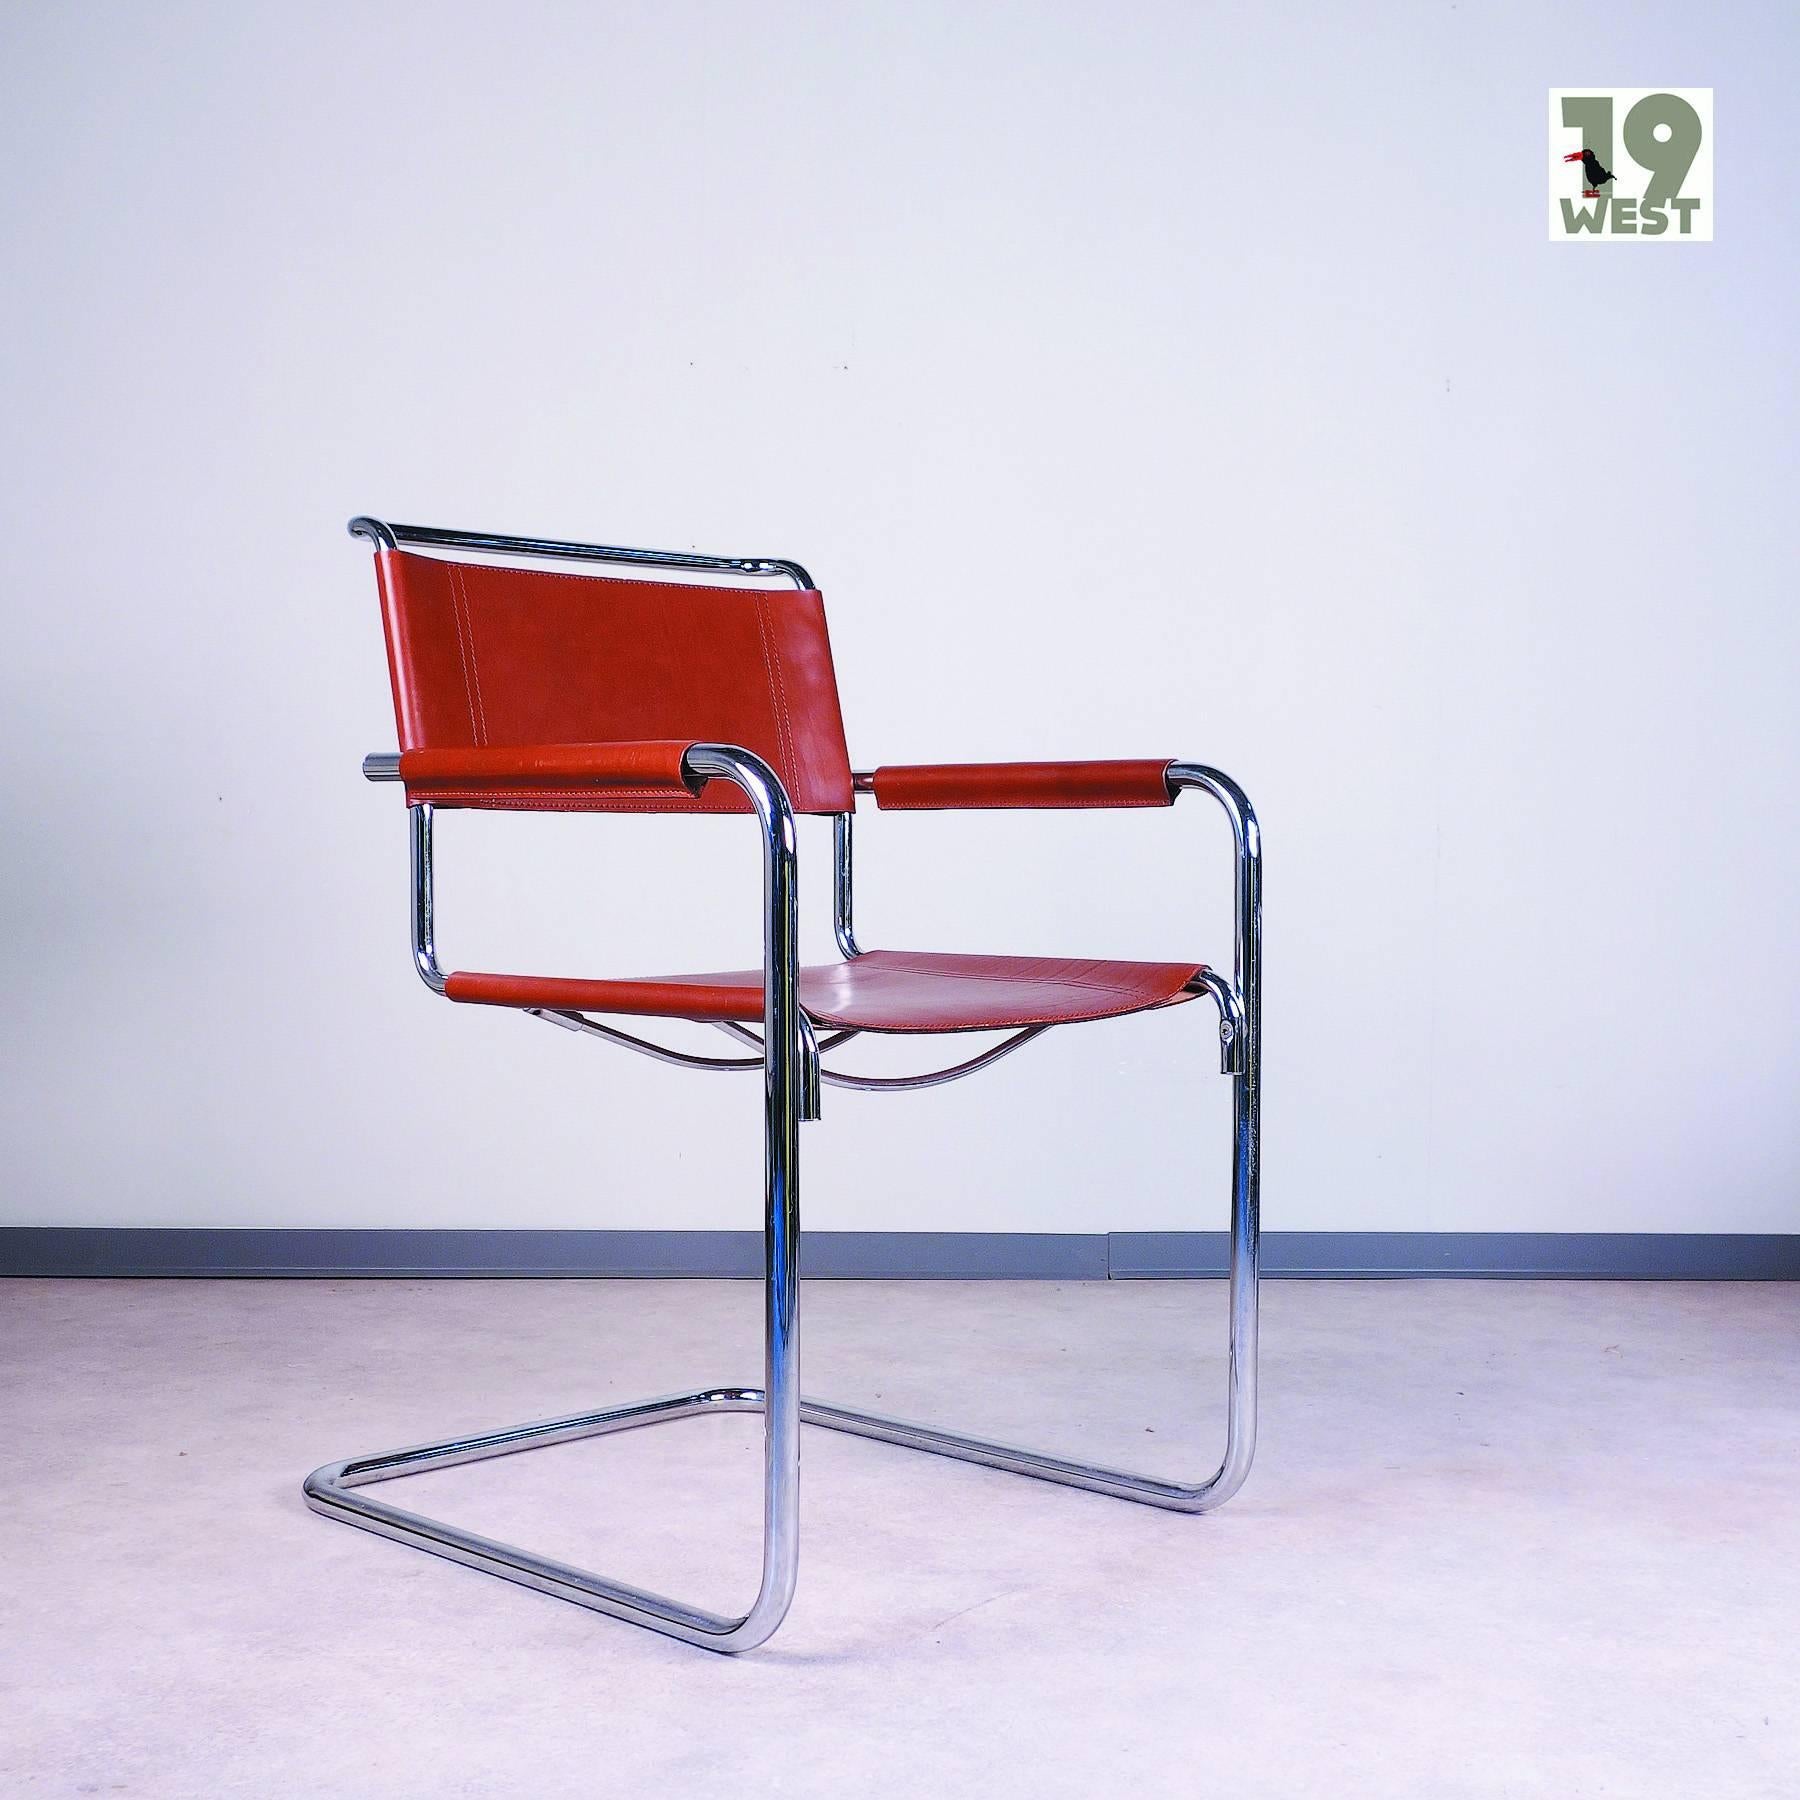 Tubular steel cantilever chair from the 1980s, manufactured by Linea Veam. High-quality furniture, which is strongly reminiscent of works by Mart Stam and Marcel Breuer. The armchair is made of chrome-plated tubular steel and covered with thick